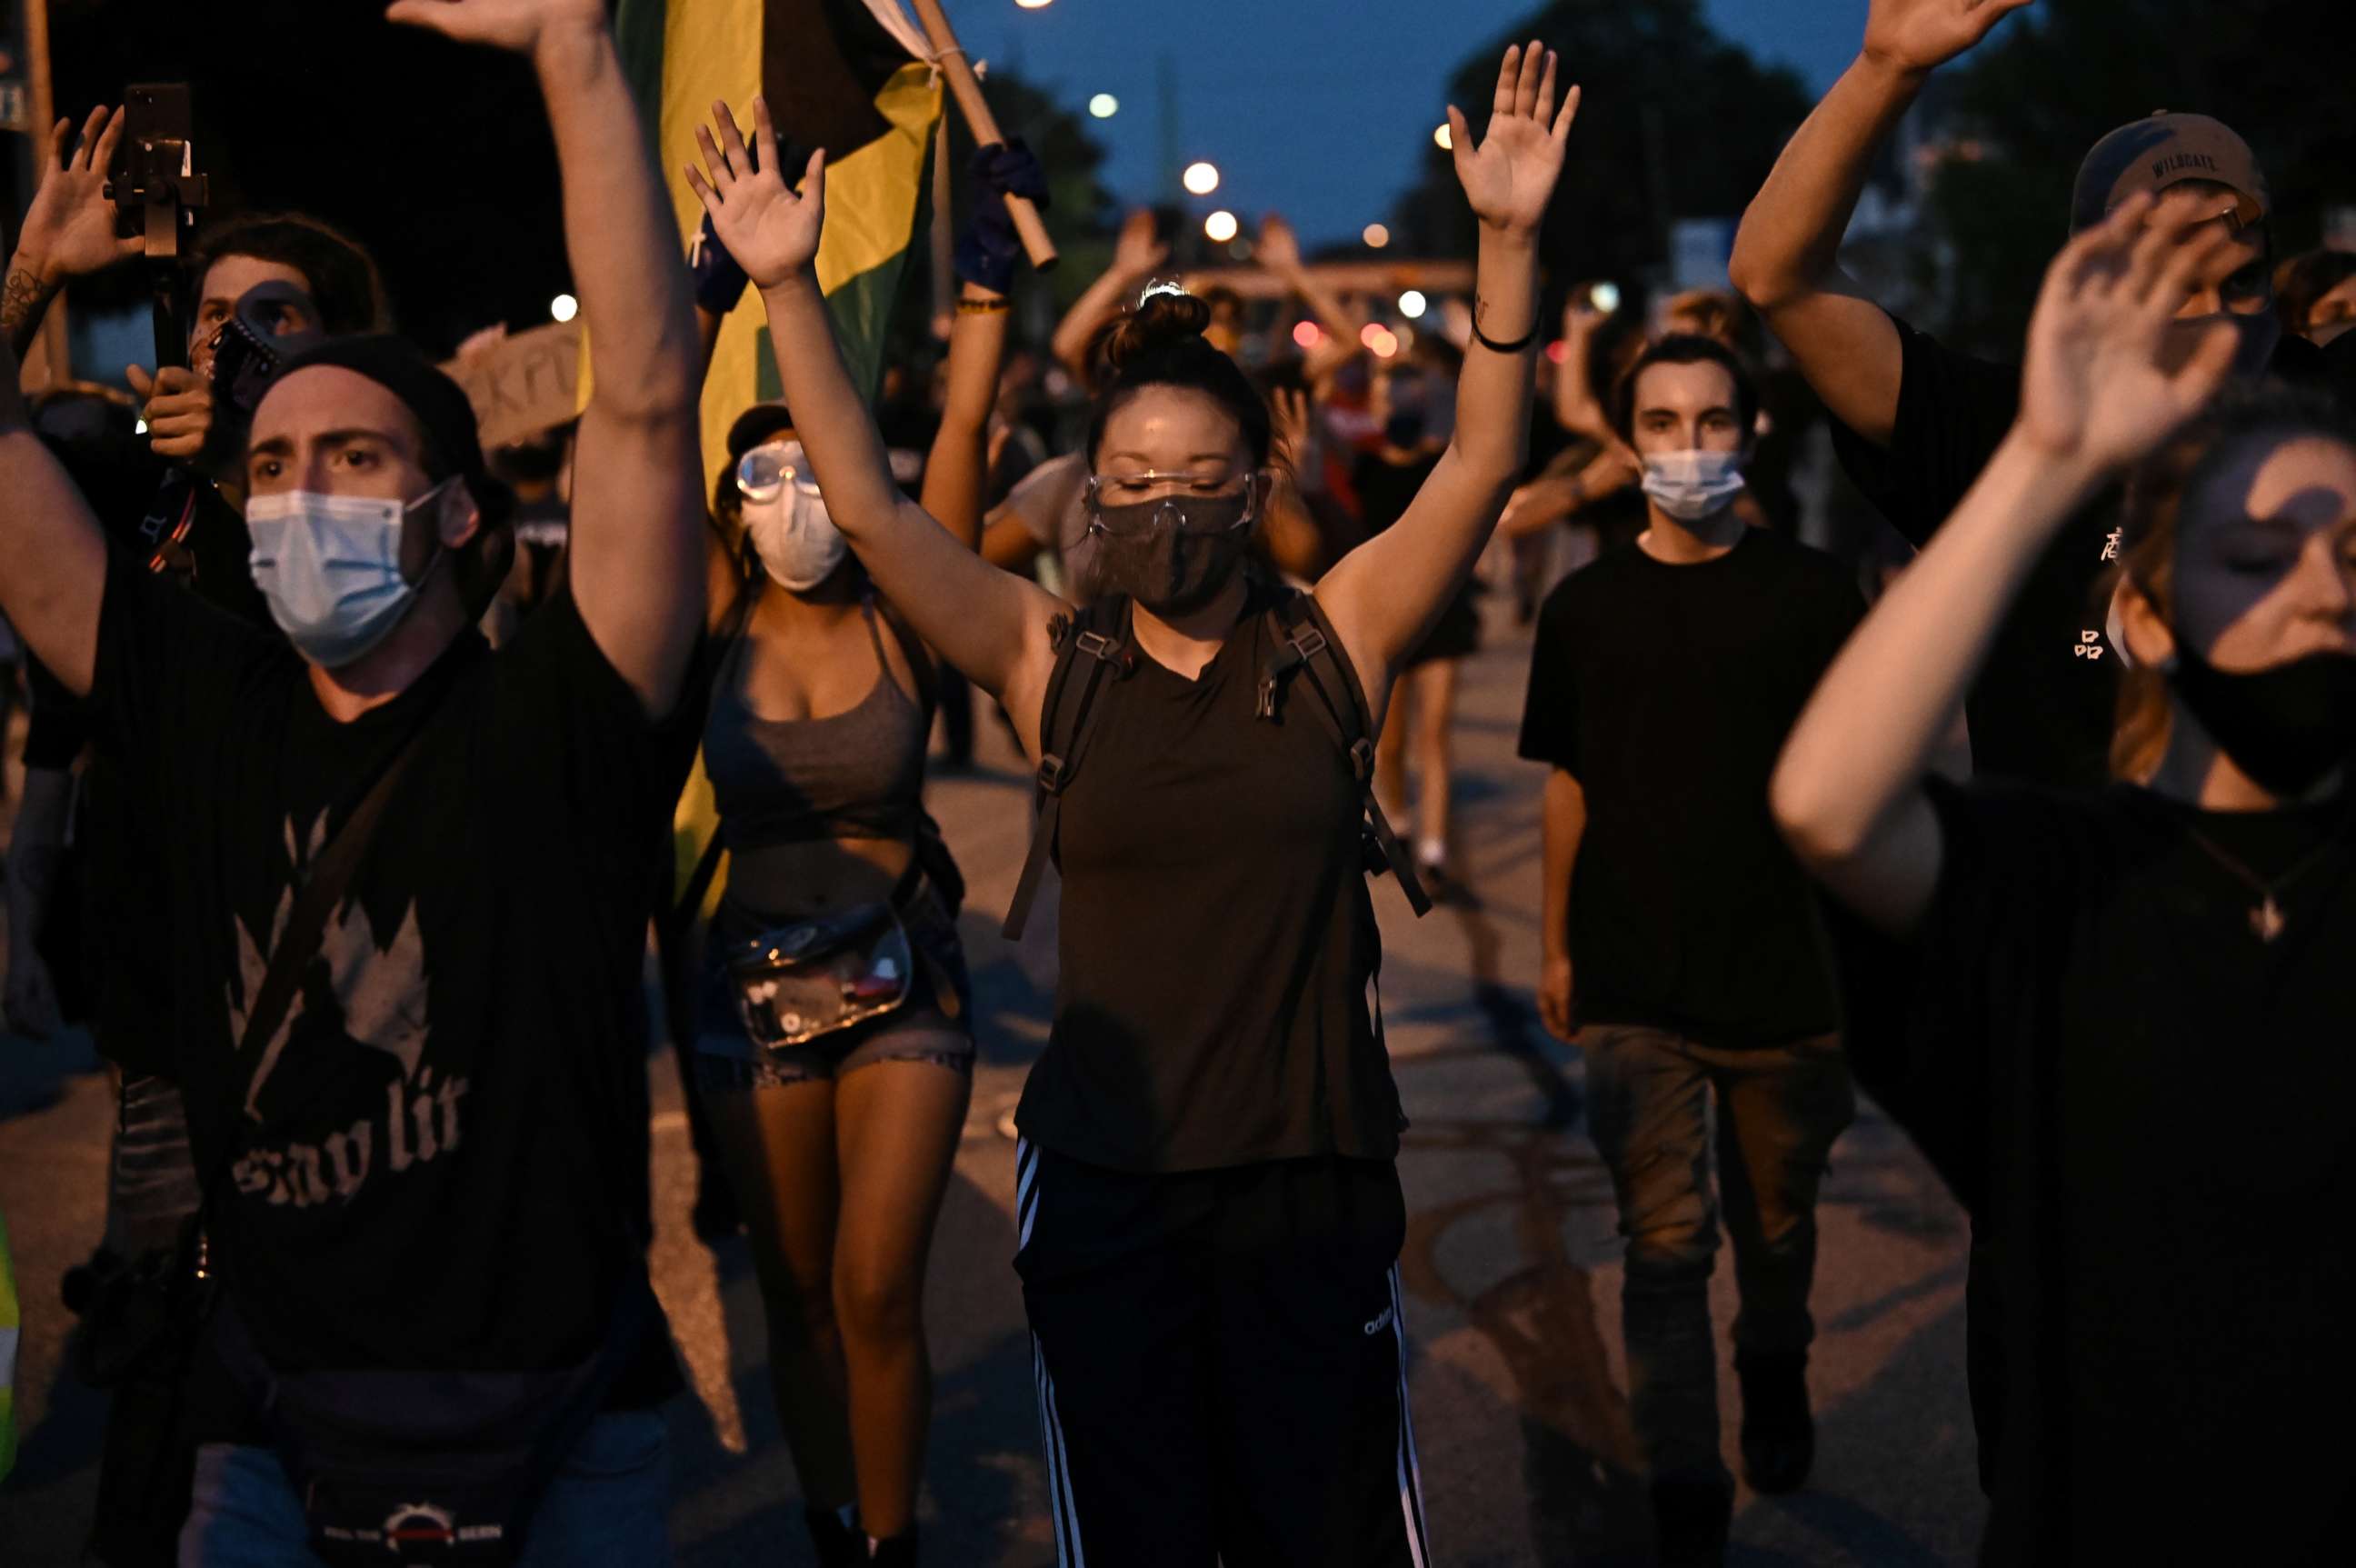 PHOTO: Demonstrators take part in a protest against the police shooting of Jacob Blake in Kenosha, Wisconsin, on Aug. 26, 2020.